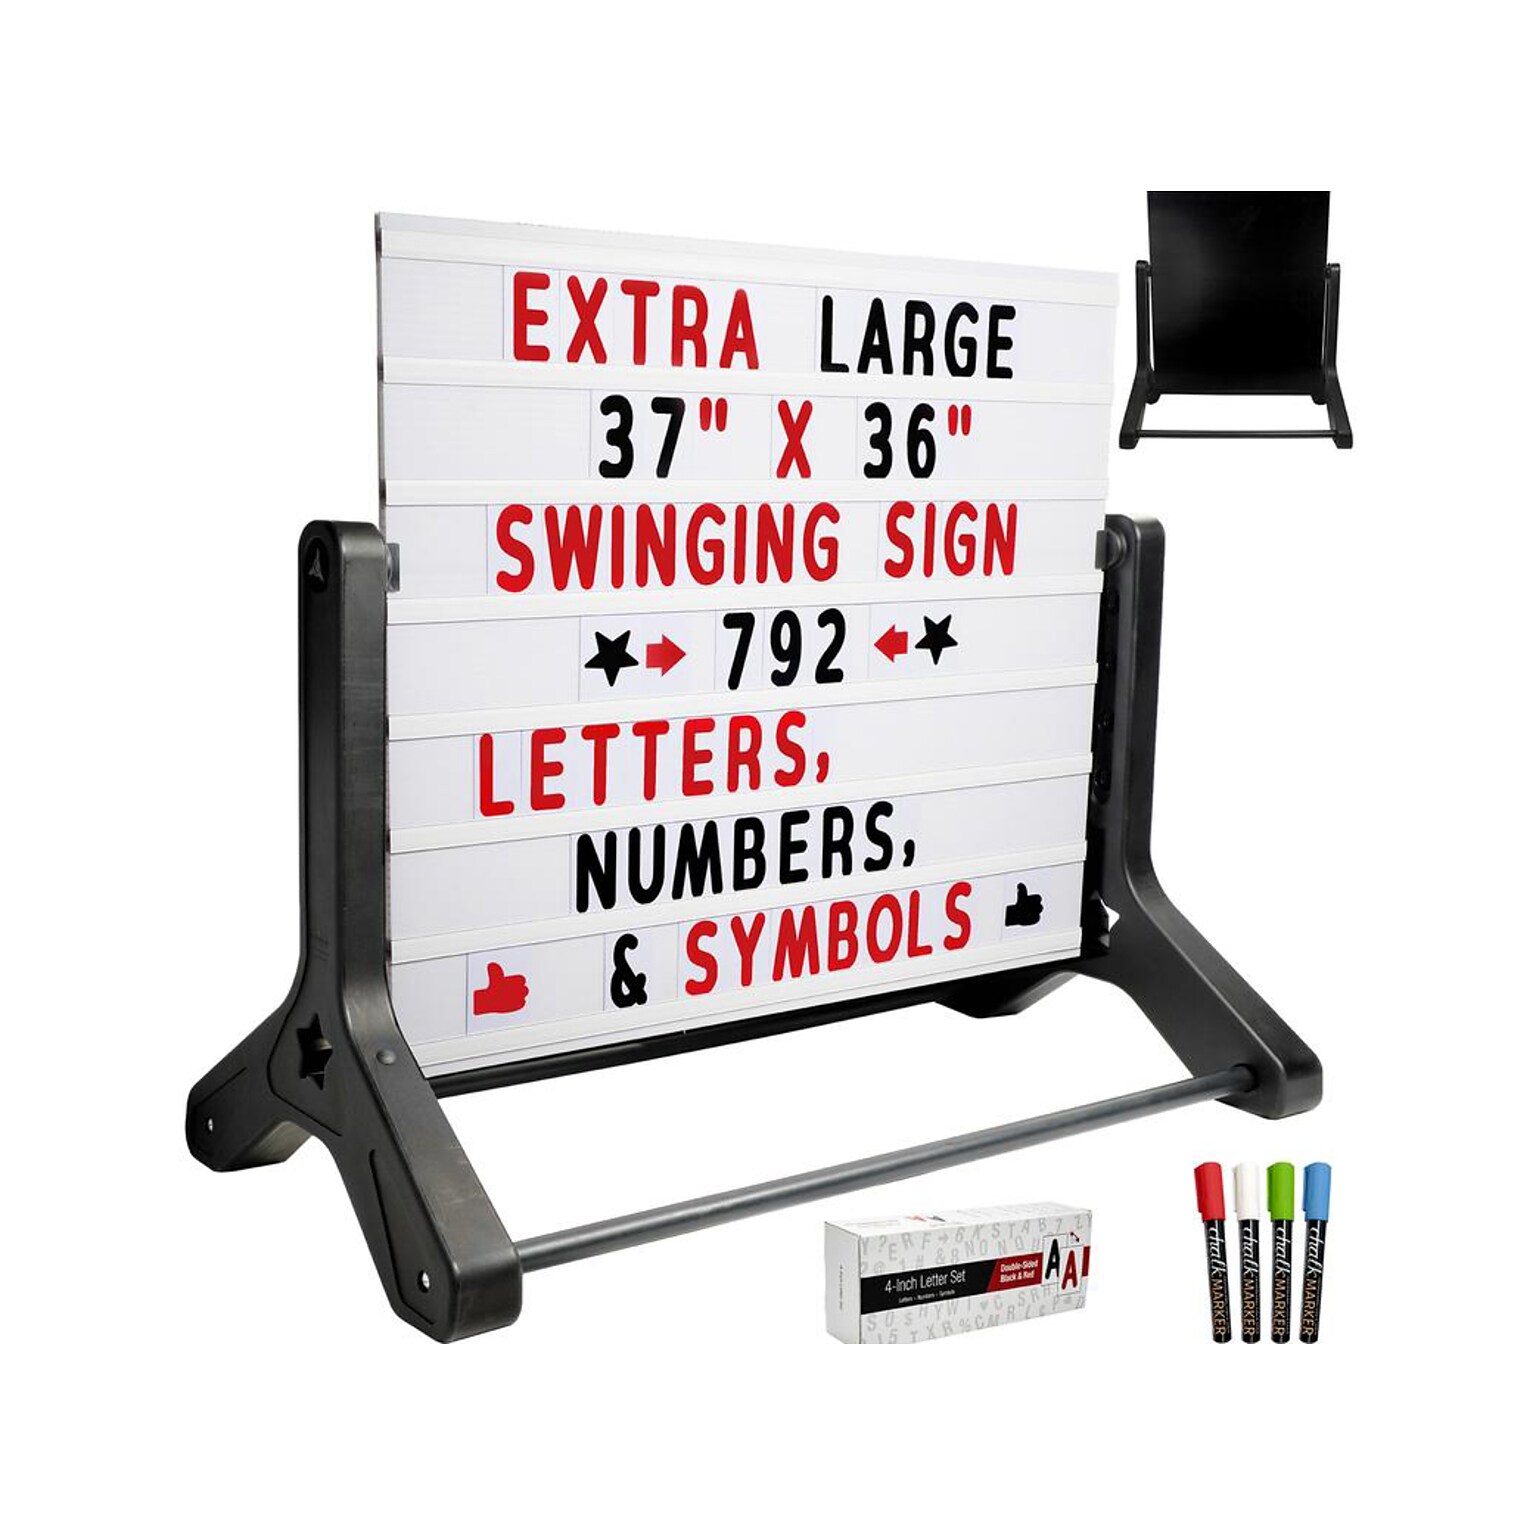 Excello Global Products Changeable Message Indoor/Outdoor Swinging Sidewalk Sign, 43.75 x 42, Black/White/Red (EGP-HD-0193-OS)